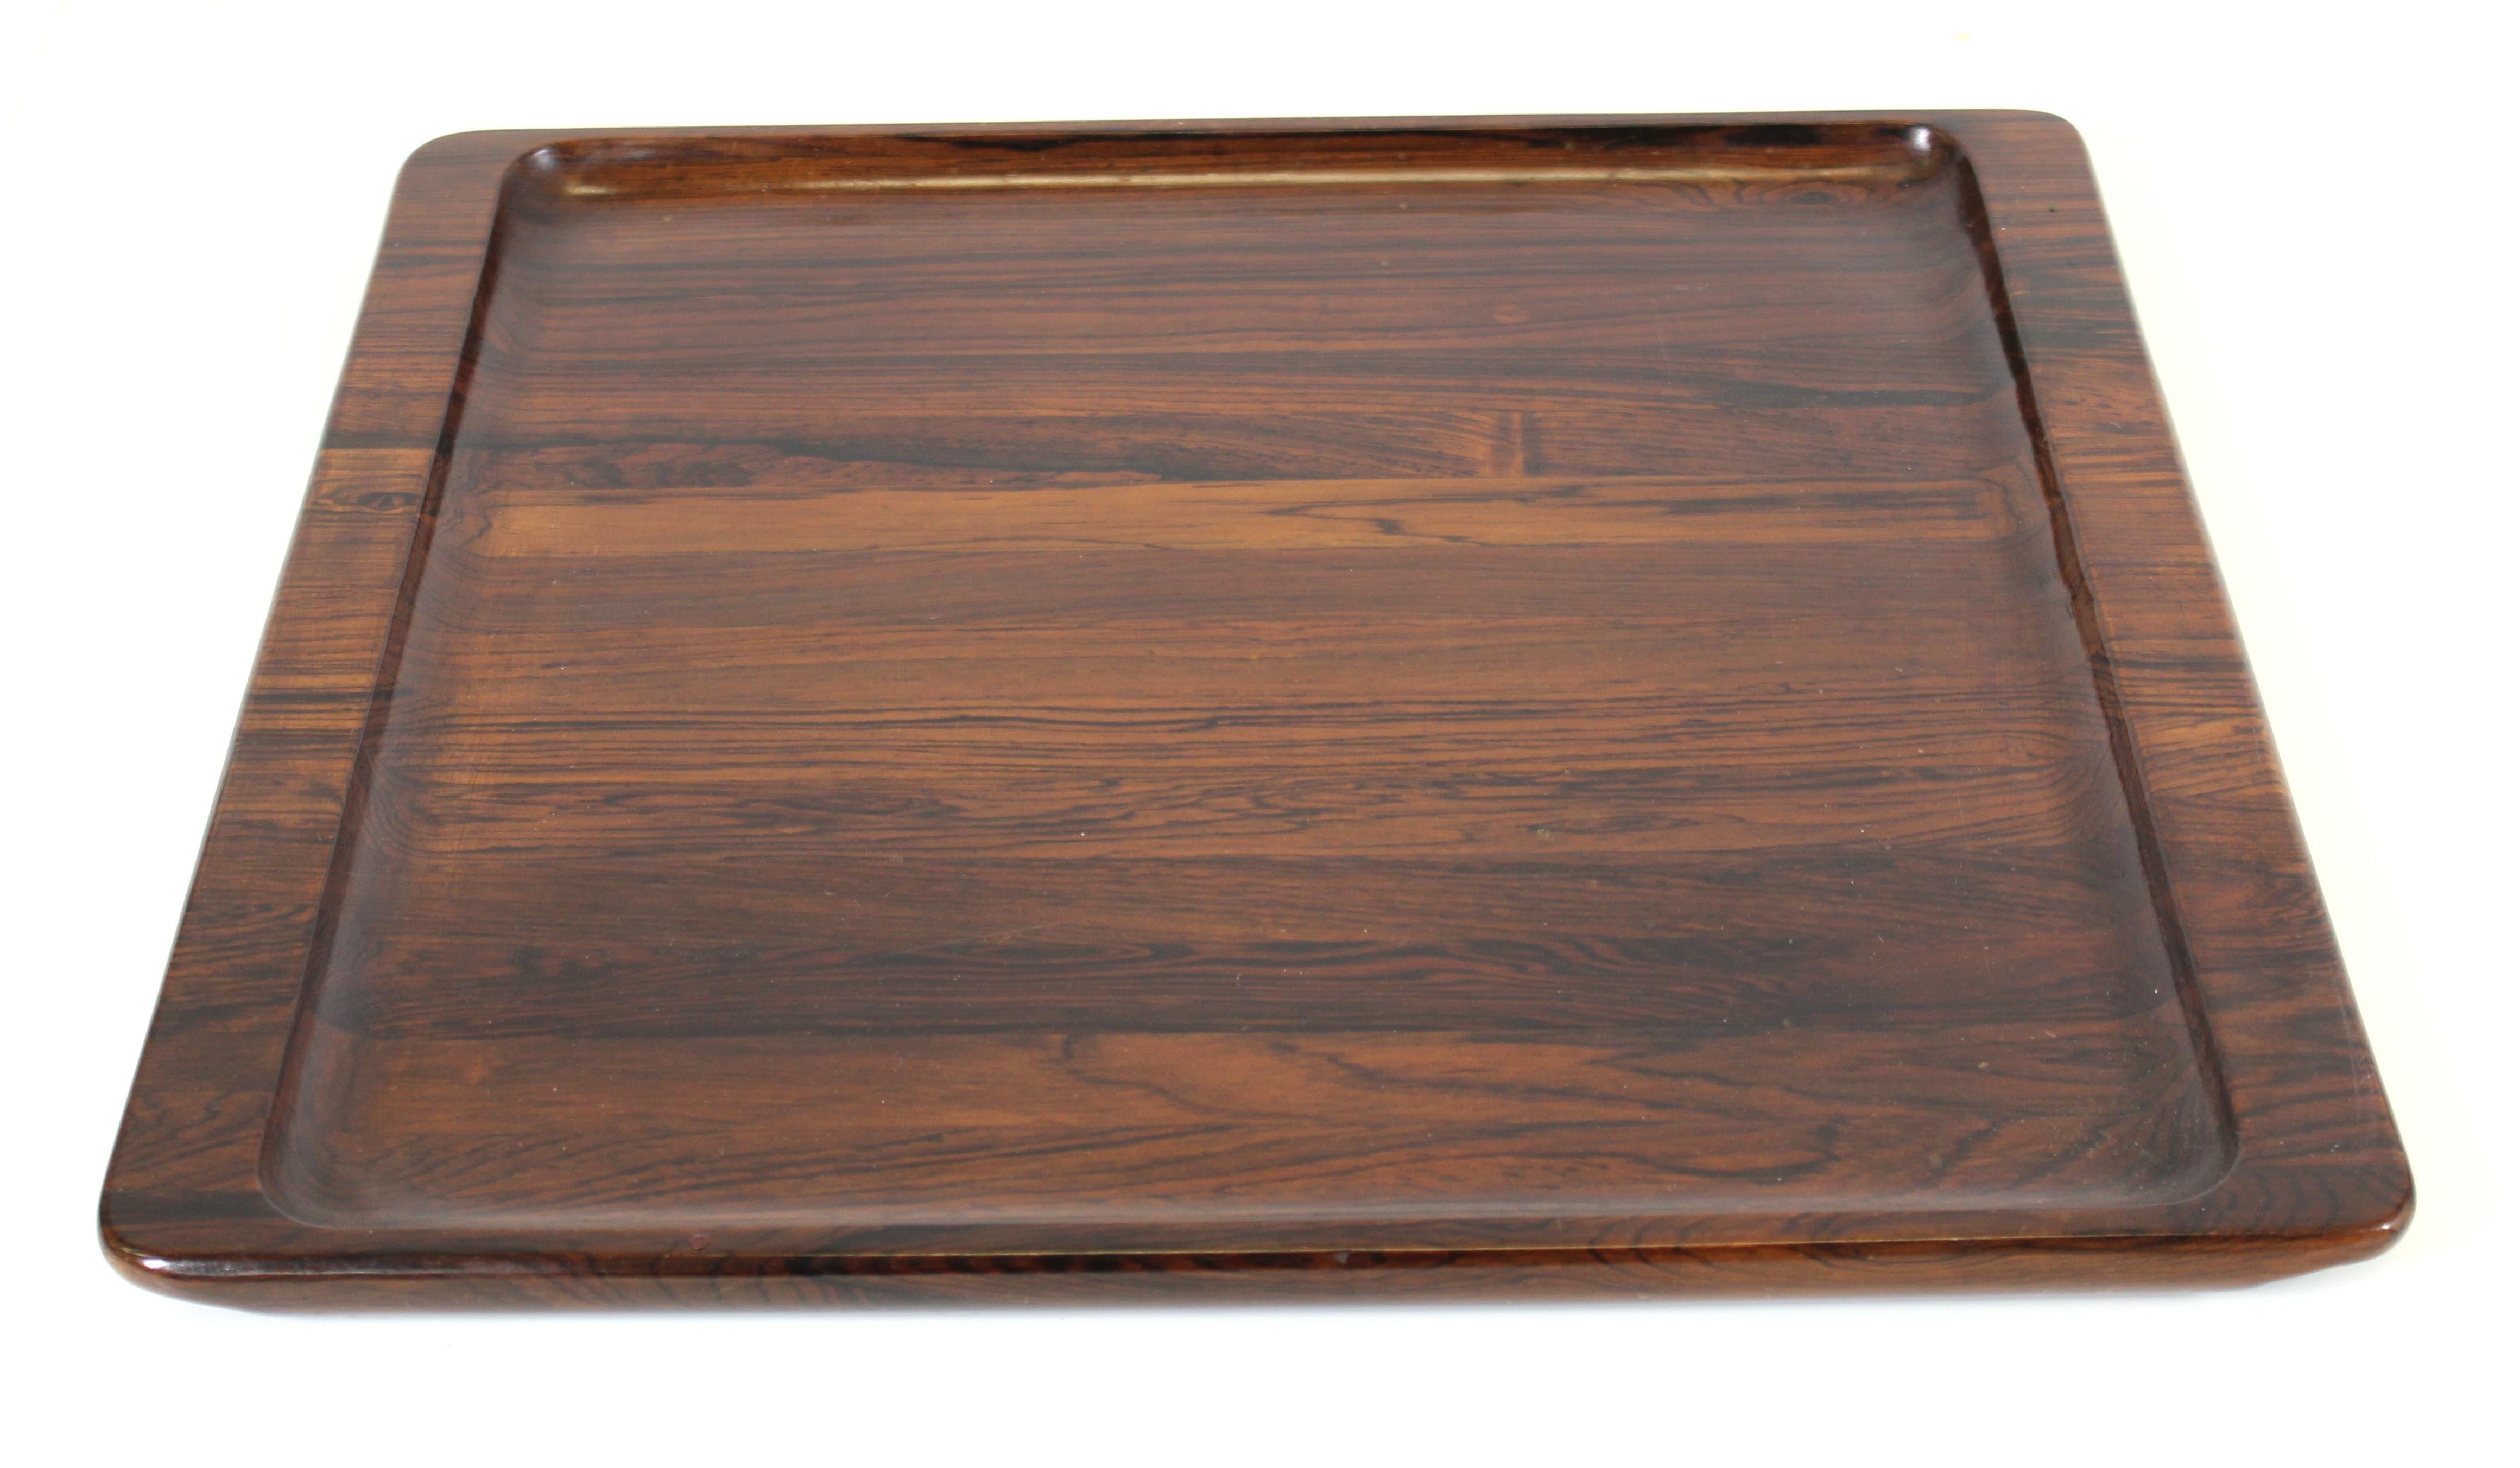 Jean Gillon Mid-Century Modern serving tray in carved Brazilian Jacaranda wood, circa 1960s. Original makers label on the back. In great vintage condition.